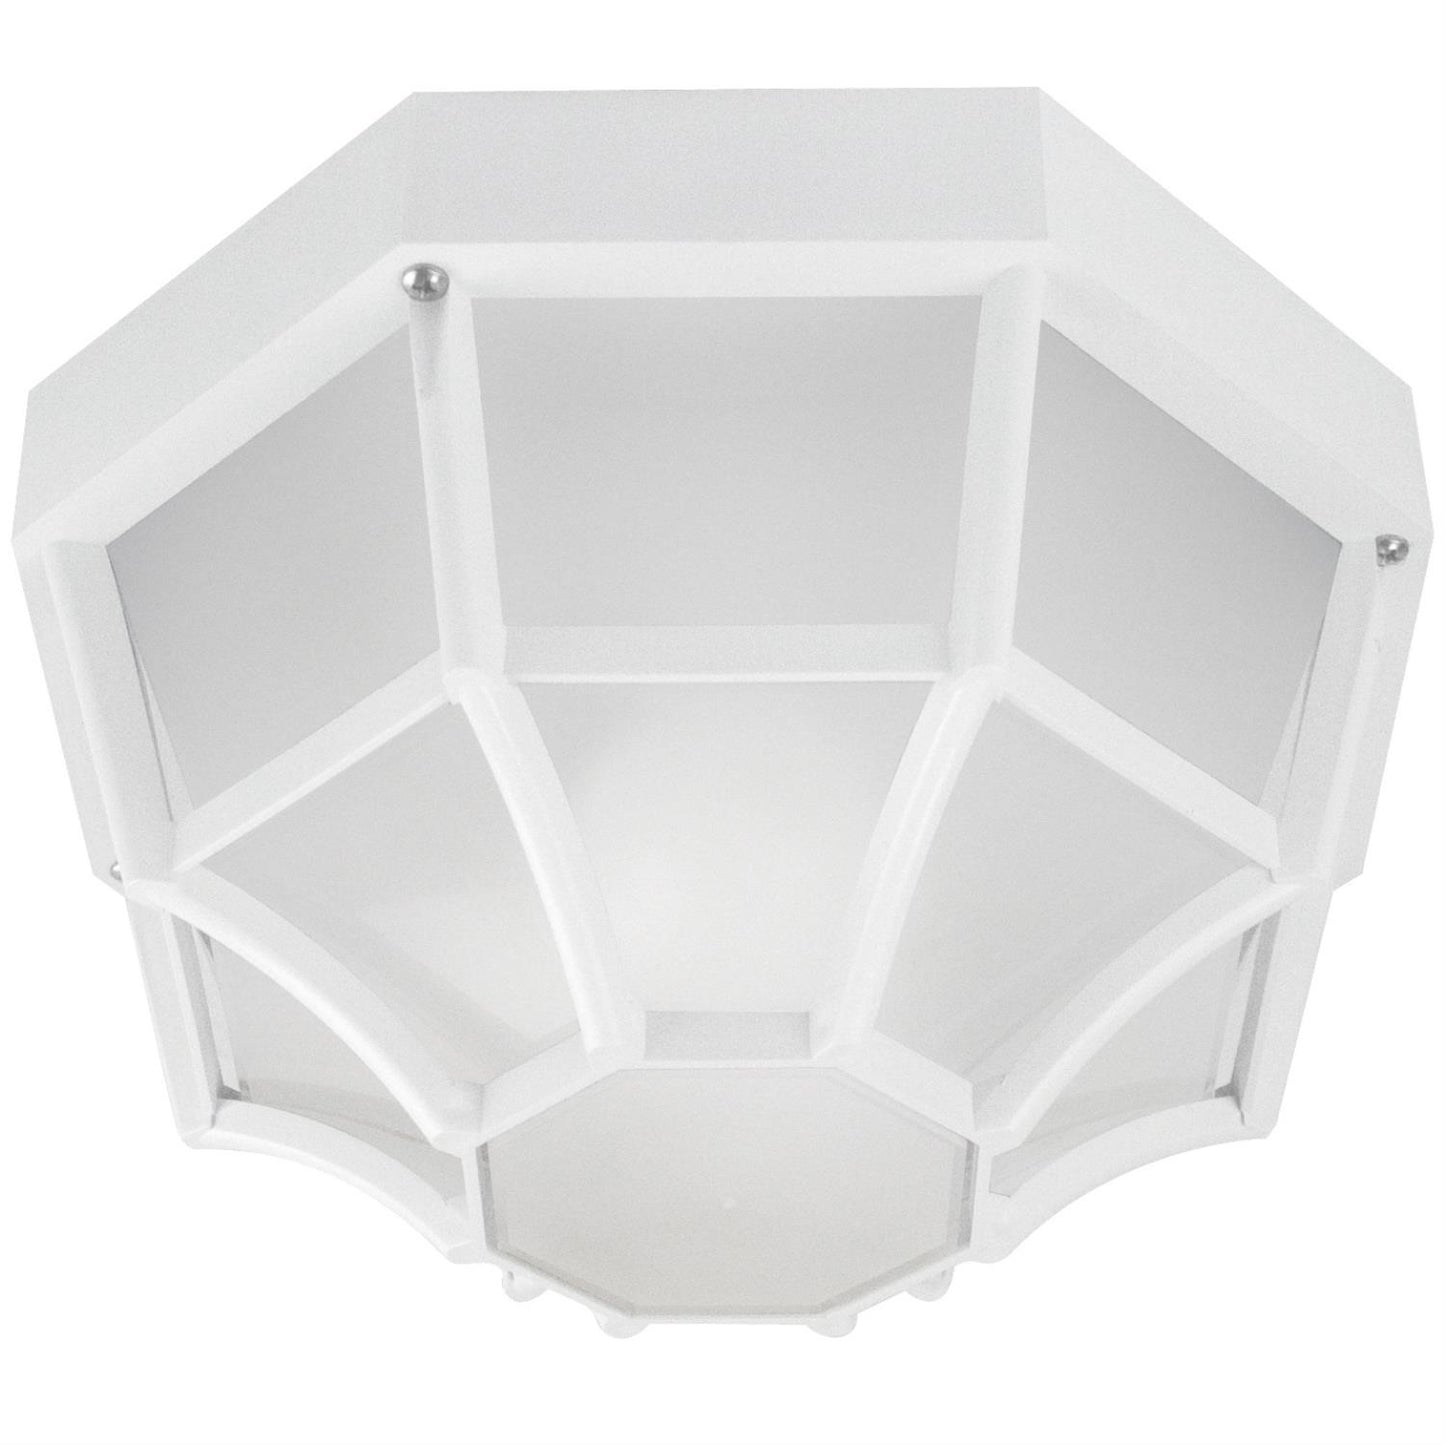 Sunlite Decorative Outdoor Energy Saving Octagonal Collection Fixture, White Finish, Frosted Lens